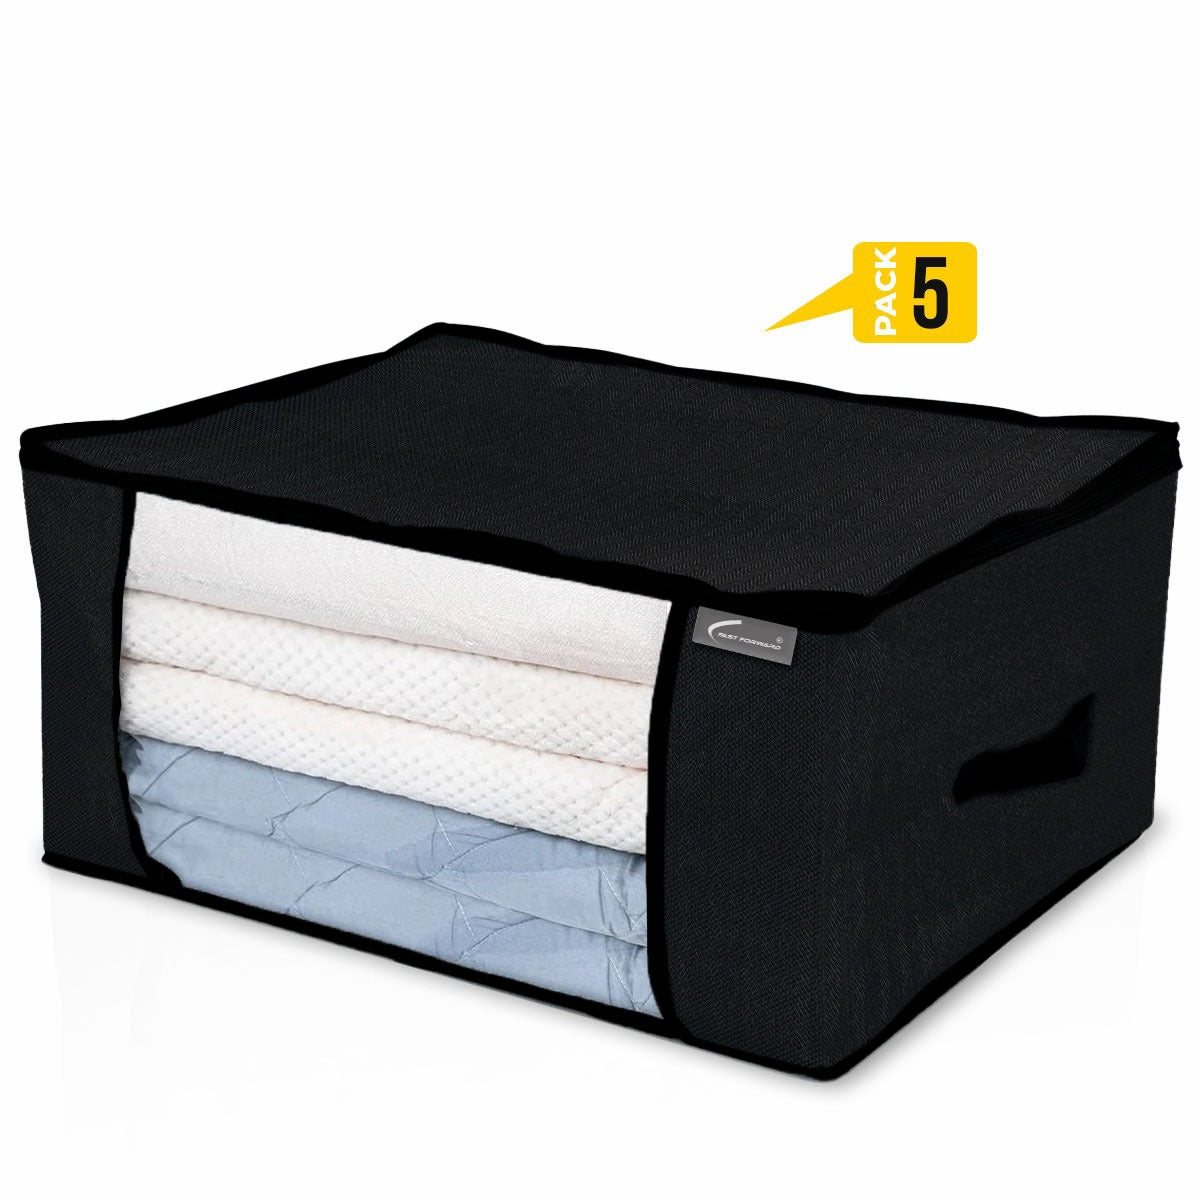 Organizer Bag Two-Way Zippers Cloth Storage Bag Water-resistant Wardrobe Space Saver HIgh Quality Non-Woven Fabric Fast Forward